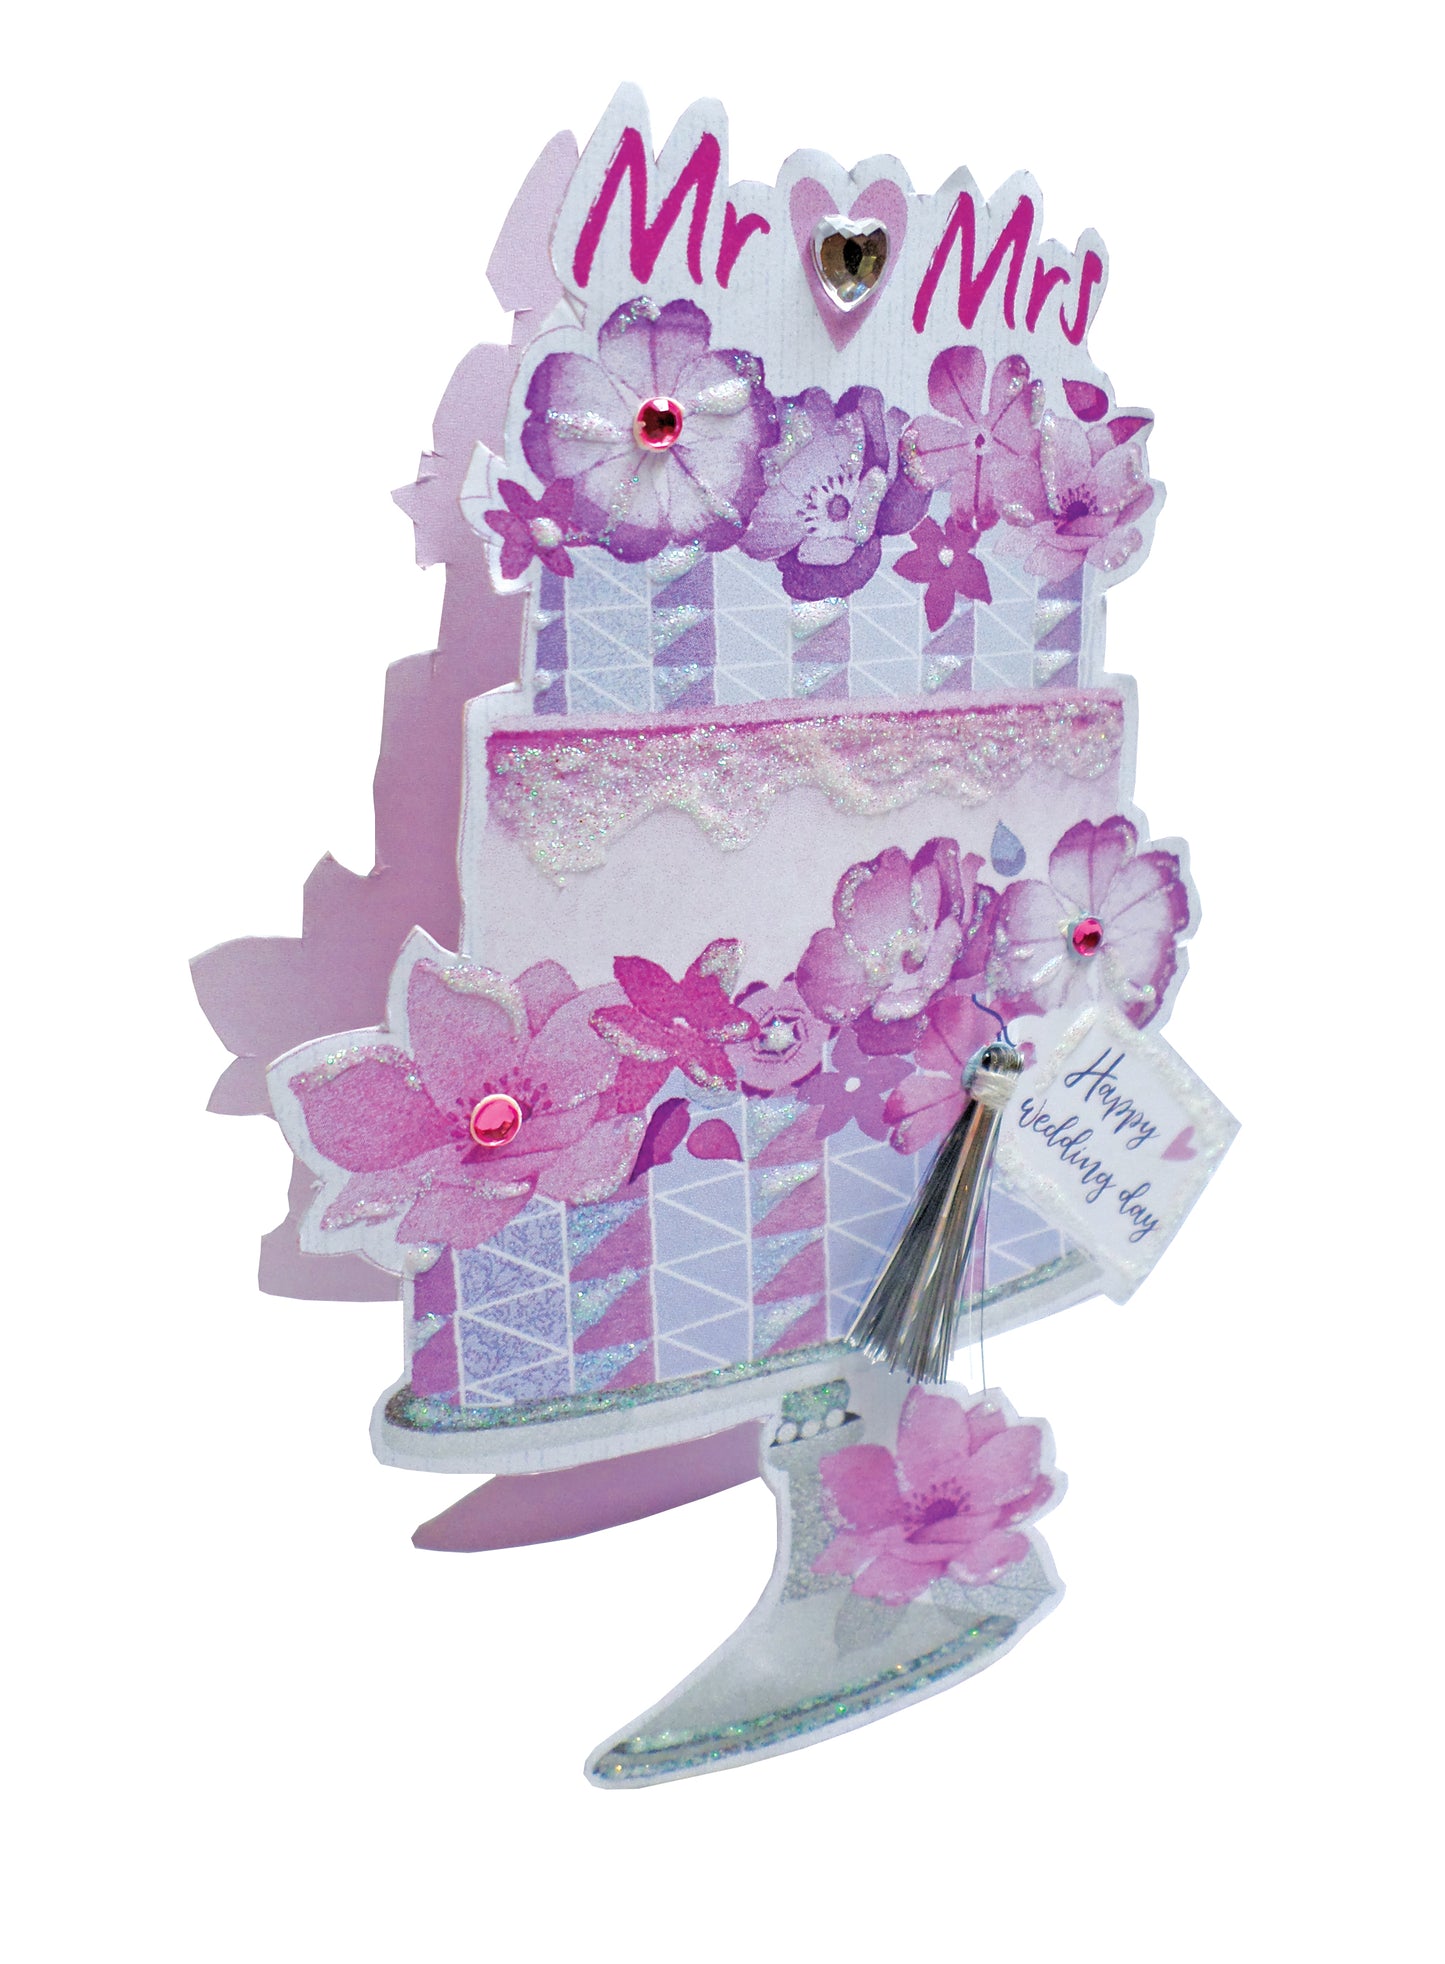 Wedding Day Mr & Mrs Cake 3D Paper Dazzle Greeting Card